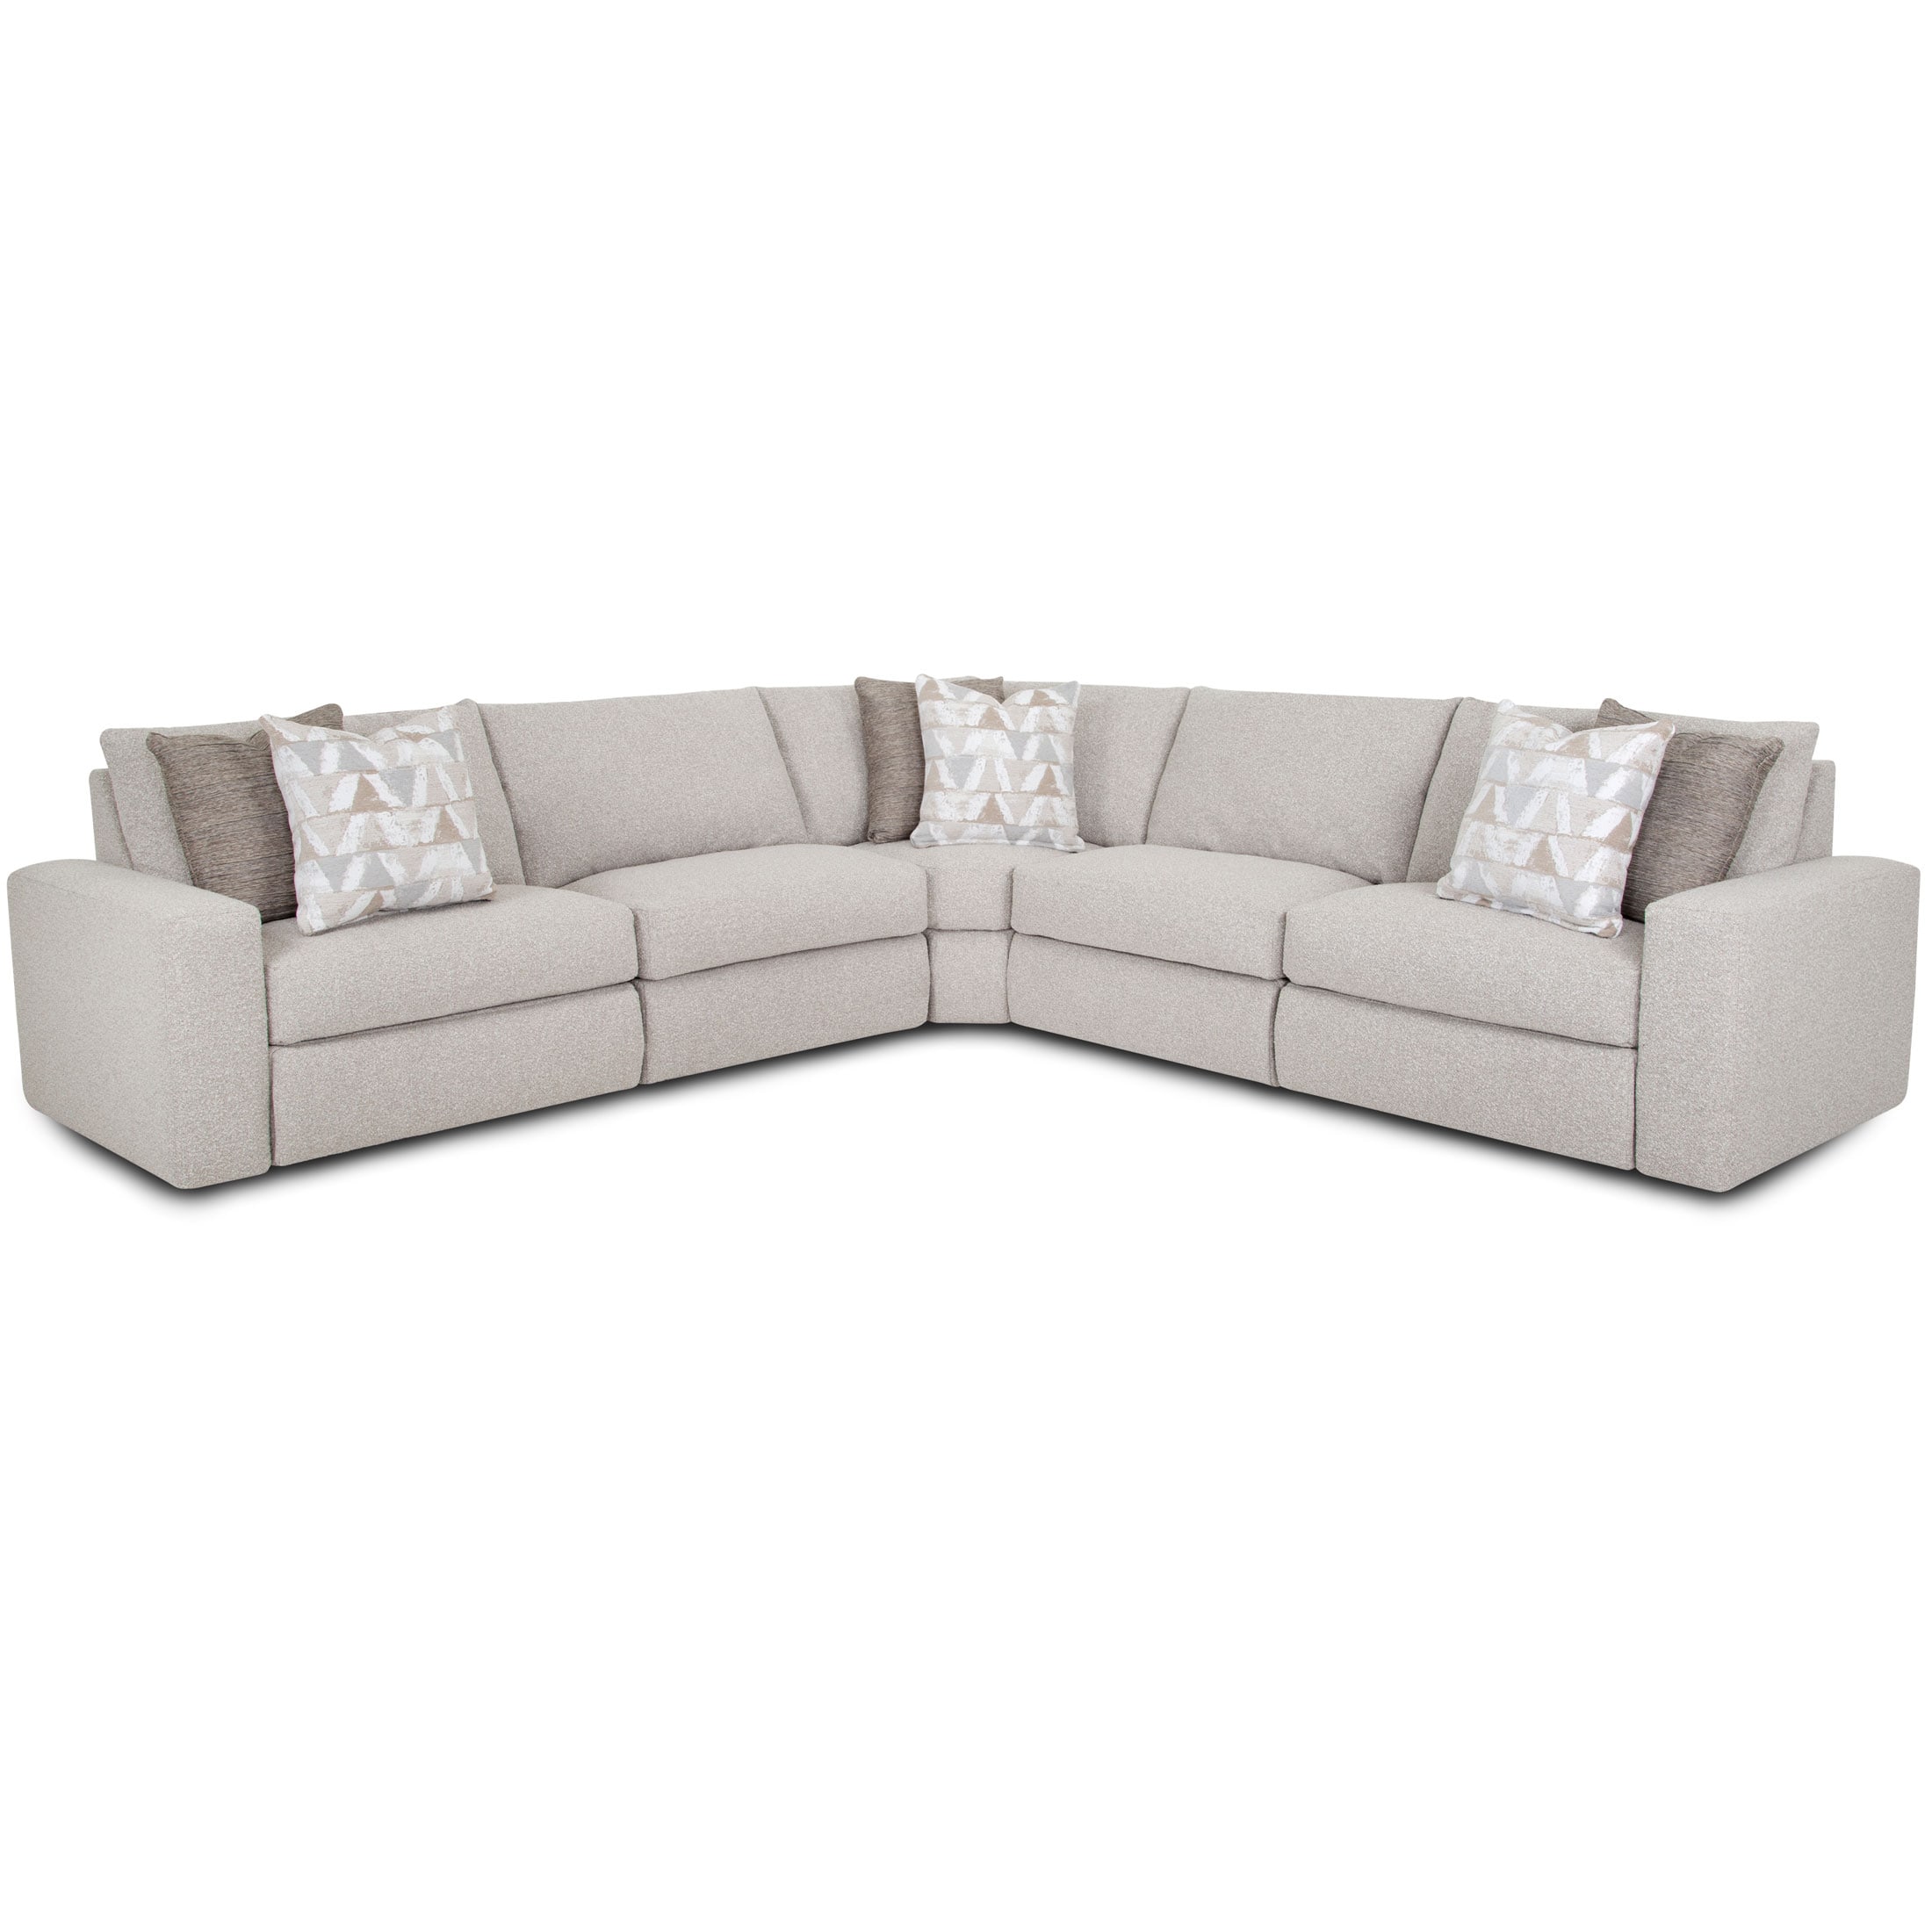 5 Piece Reclining Sectional